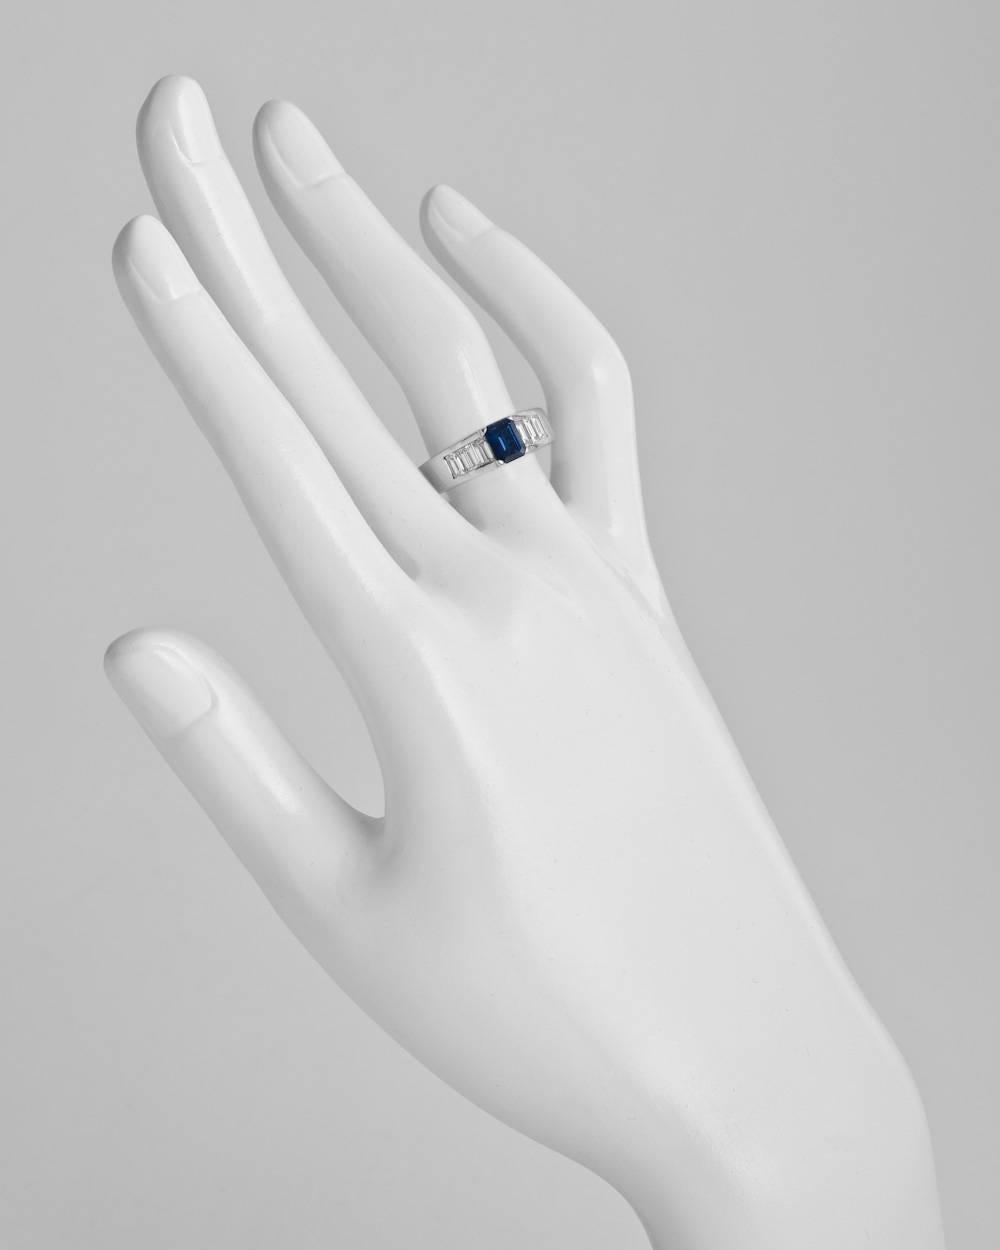 Sapphire and diamond ring, centering an emerald-cut sapphire weighing approximately 1.00 carat, with step-cut diamond shoulders and profile, the 18 diamonds weighing approximately 2.00 total carats, mounted in 18k white gold, numbered 9687870,